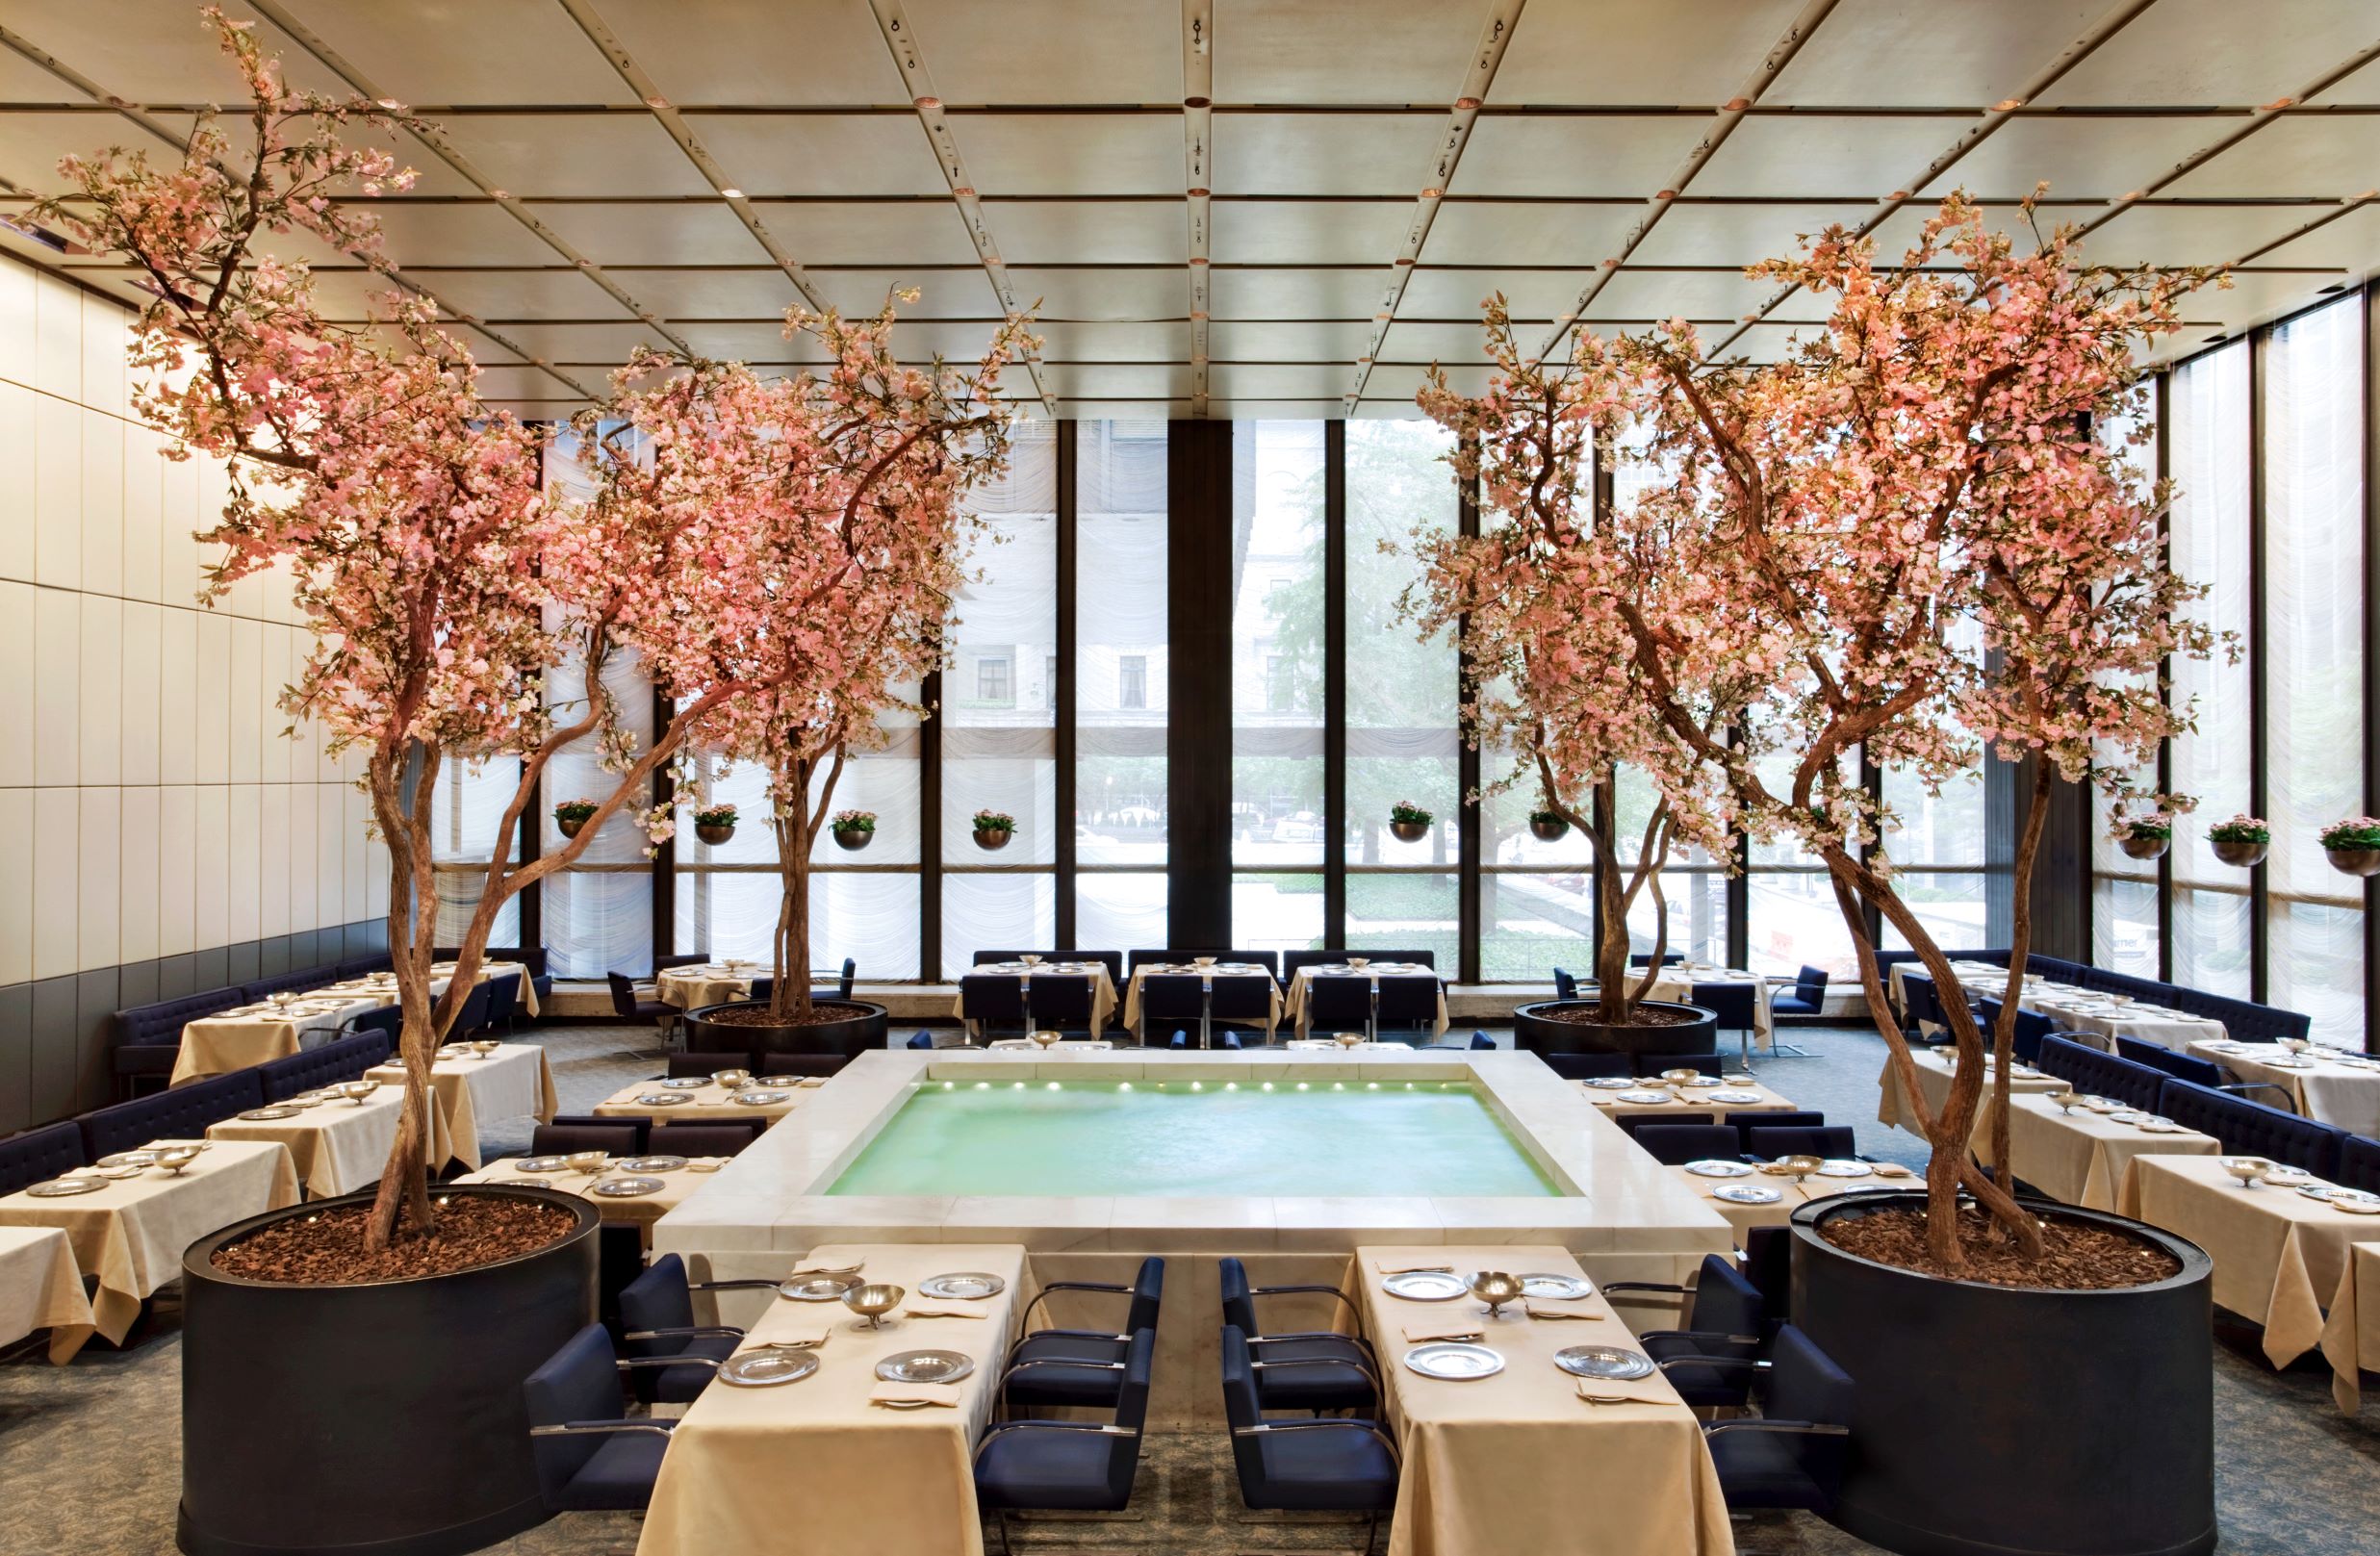 Interior view of the Pool Room in the Four Seasons restaurant in the Seagram Building. As reproduced in Philip Johnson: A Visual Biography Photo by Jennifer Calais Smith
(jennifercalais.com)